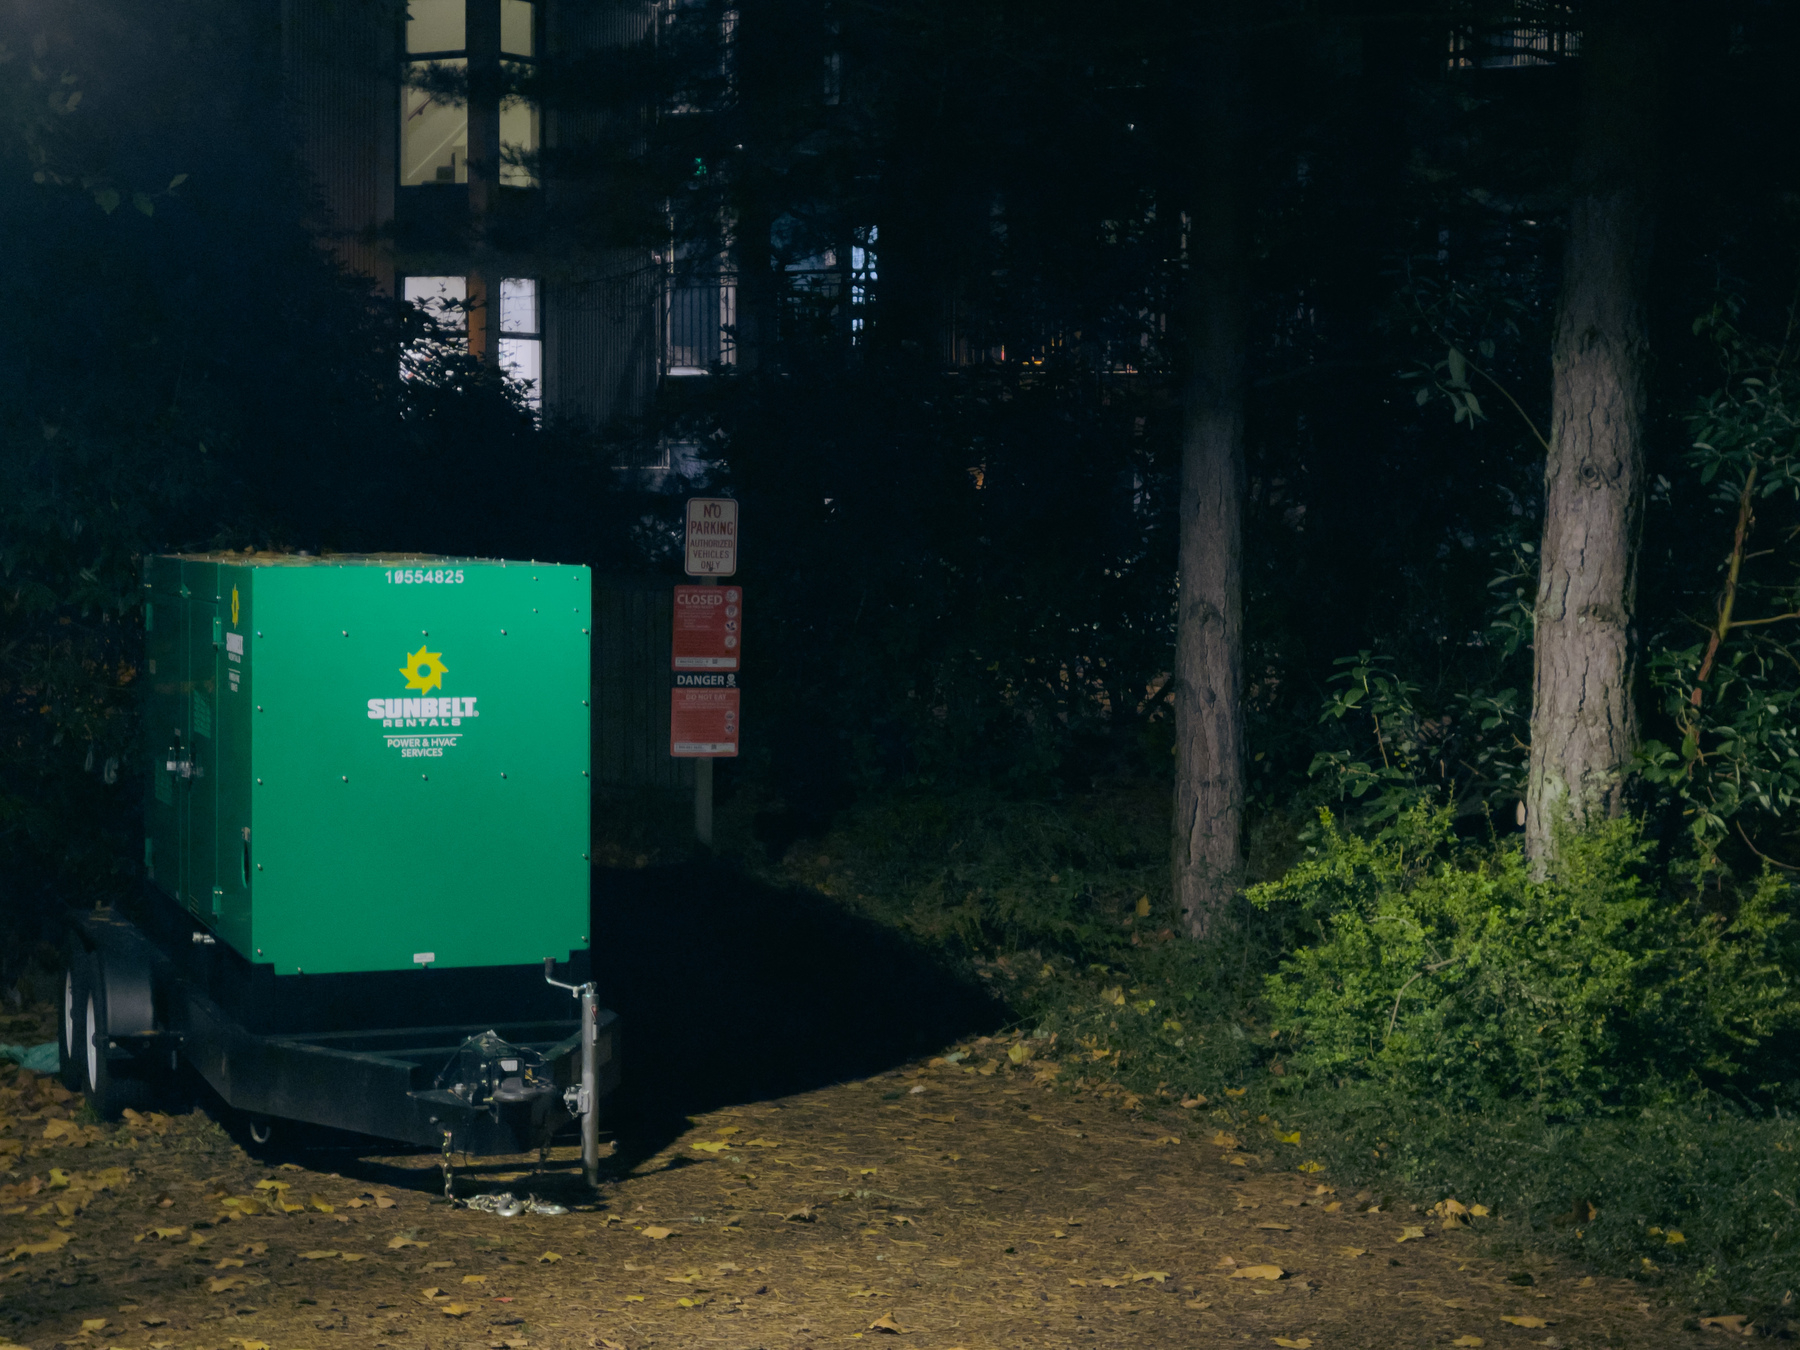 Portable generator in clearing between trees, illuminated windows of multi story building in distance, scene illuminated by security lights.